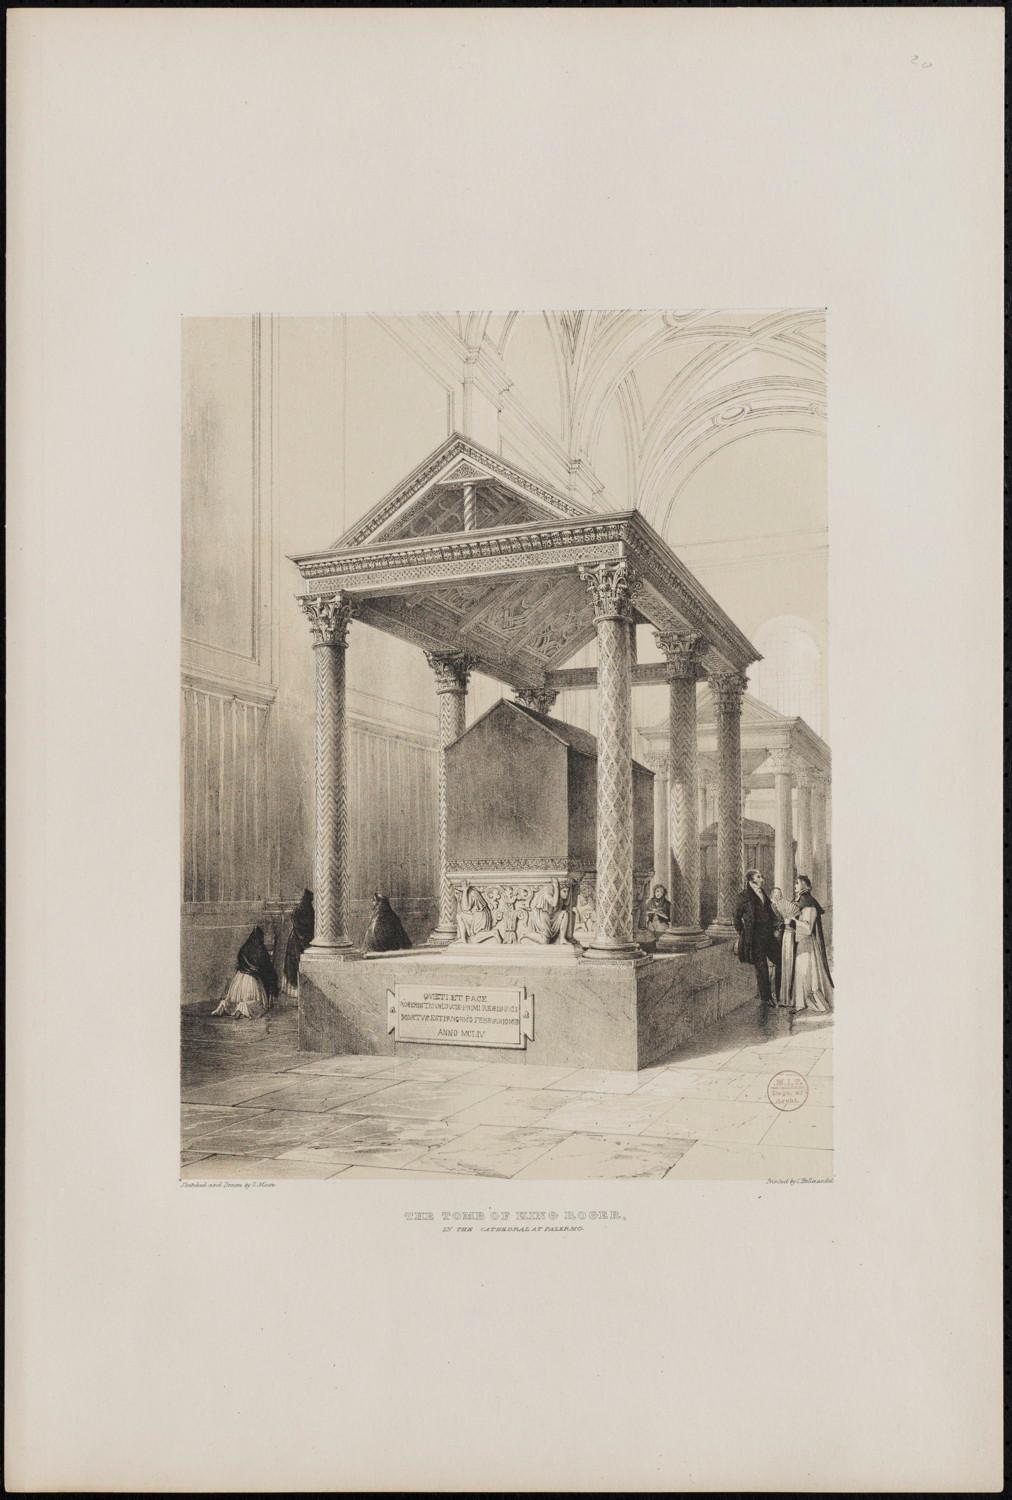 Lithograph of the tomb of King Roger II in the Palermo Cathedral